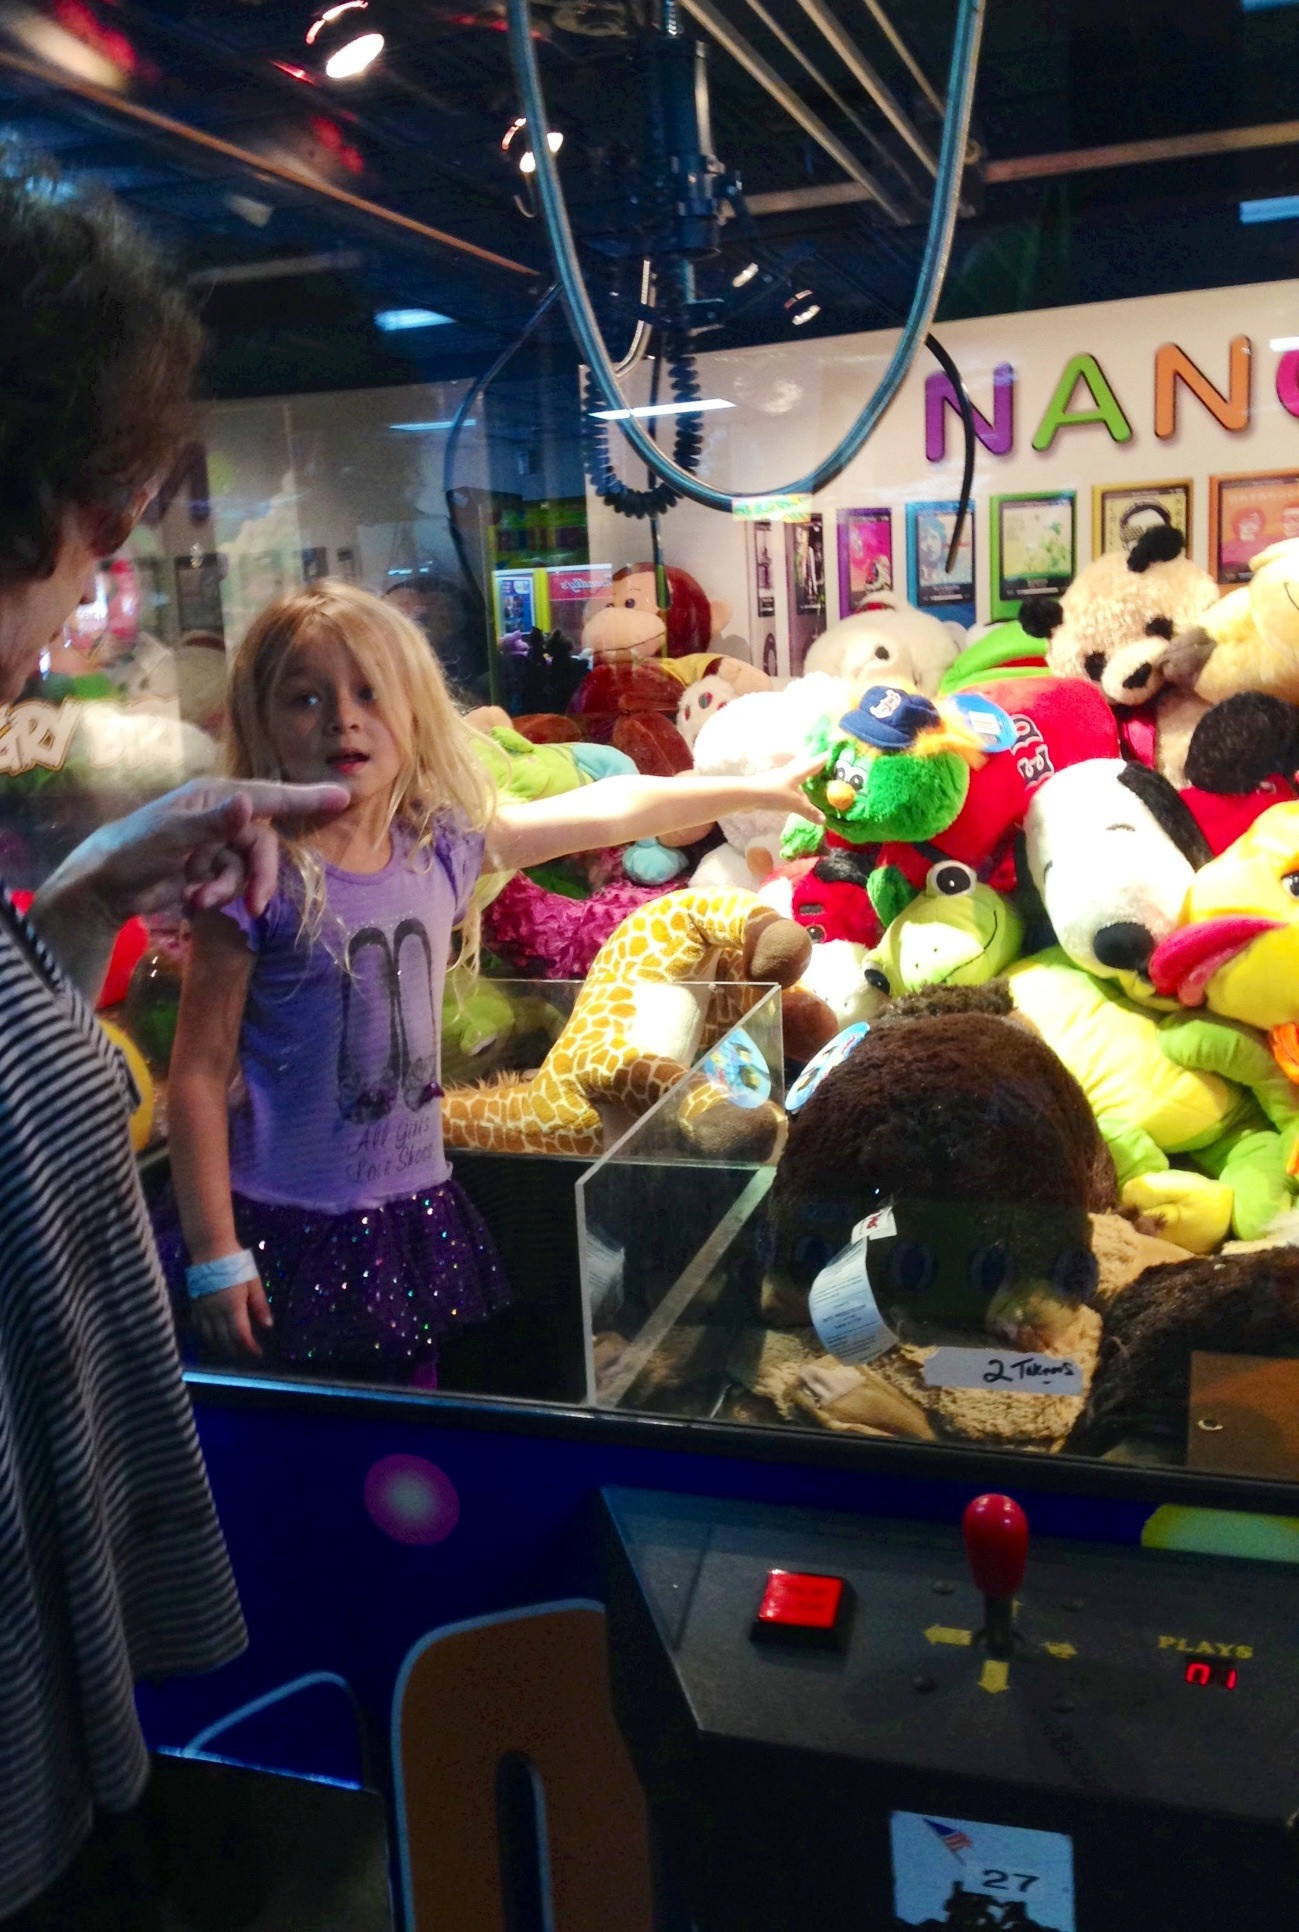 The kid who climbed into a claw machine and passed out stuffed toys to passersby.